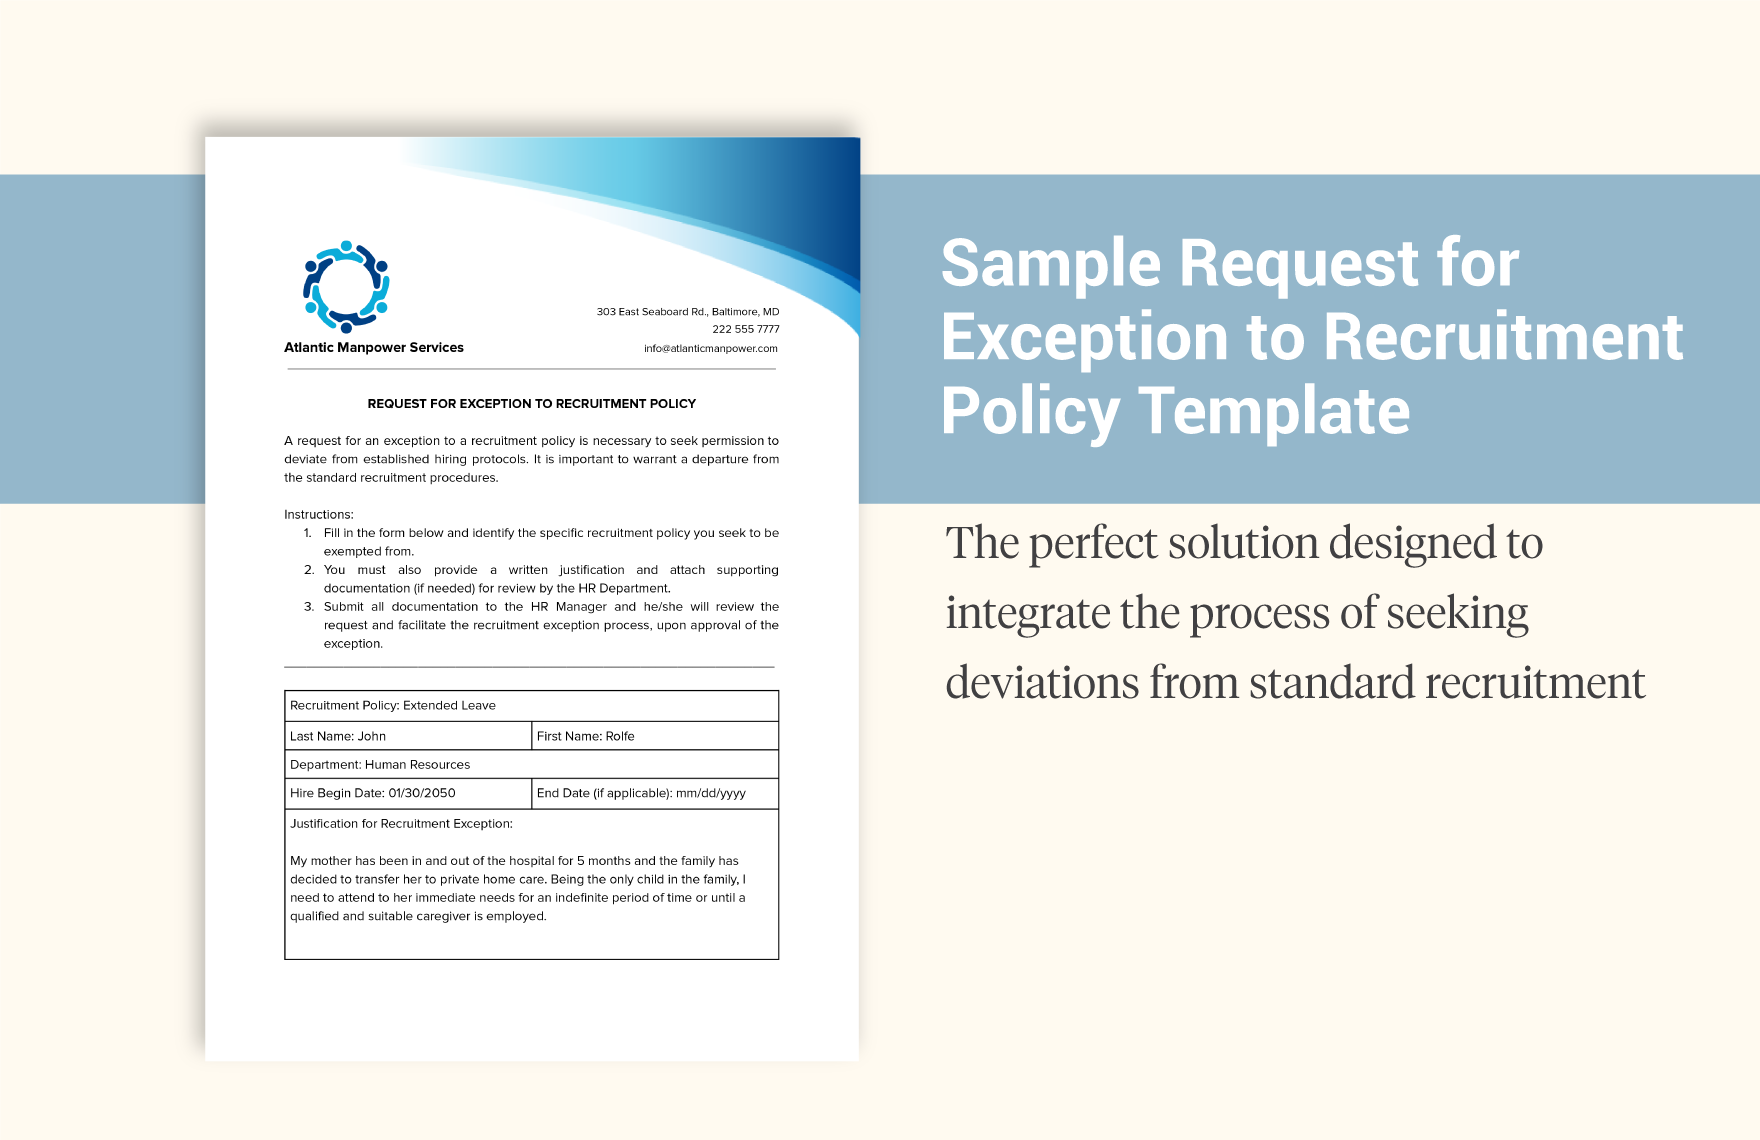 Sample Request for Exception to Recruitment Policy Template